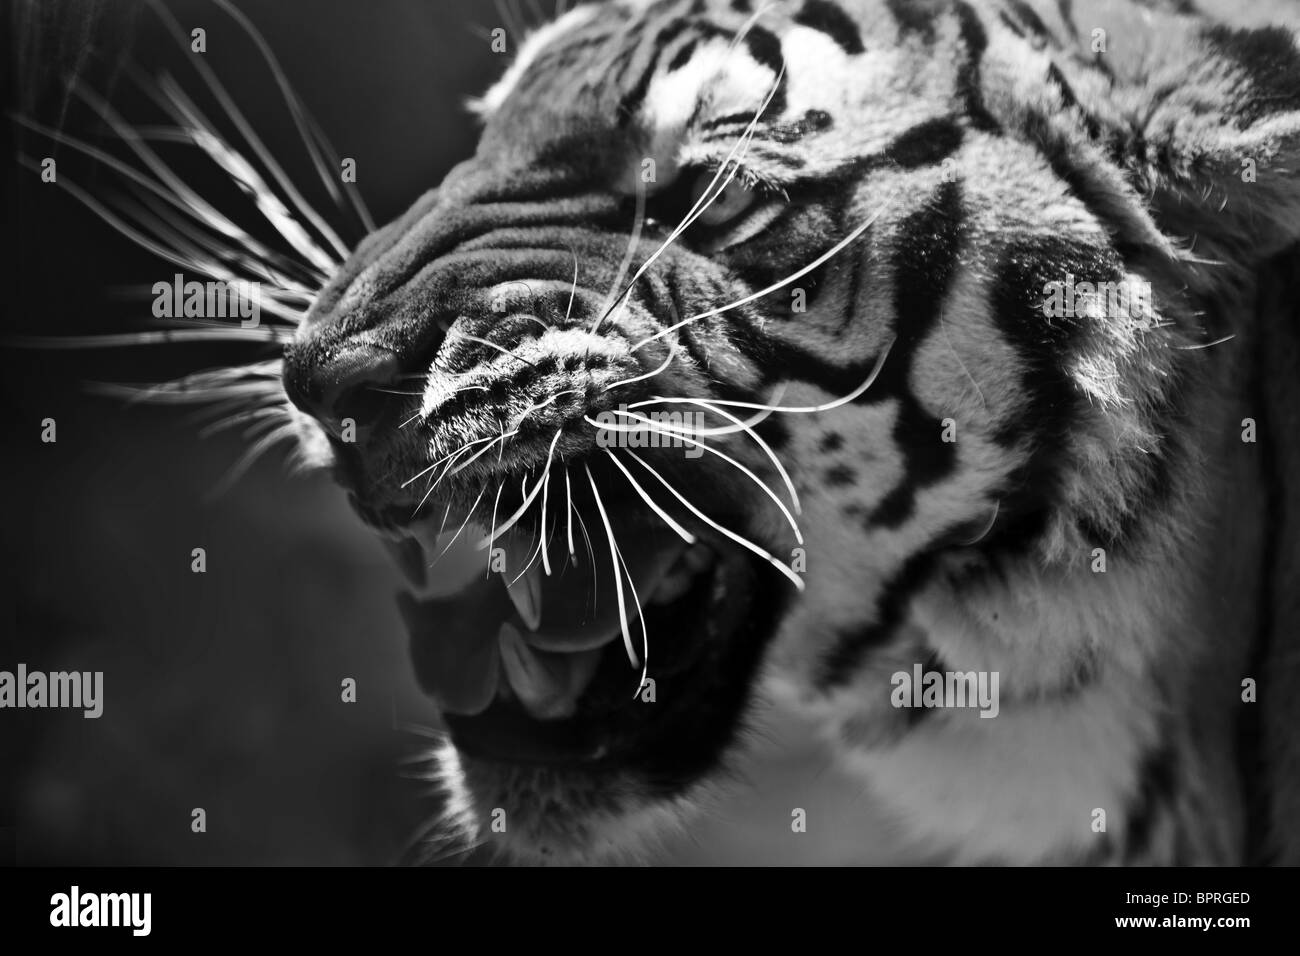 Black and white close up of a snarling tiger Stock Photo